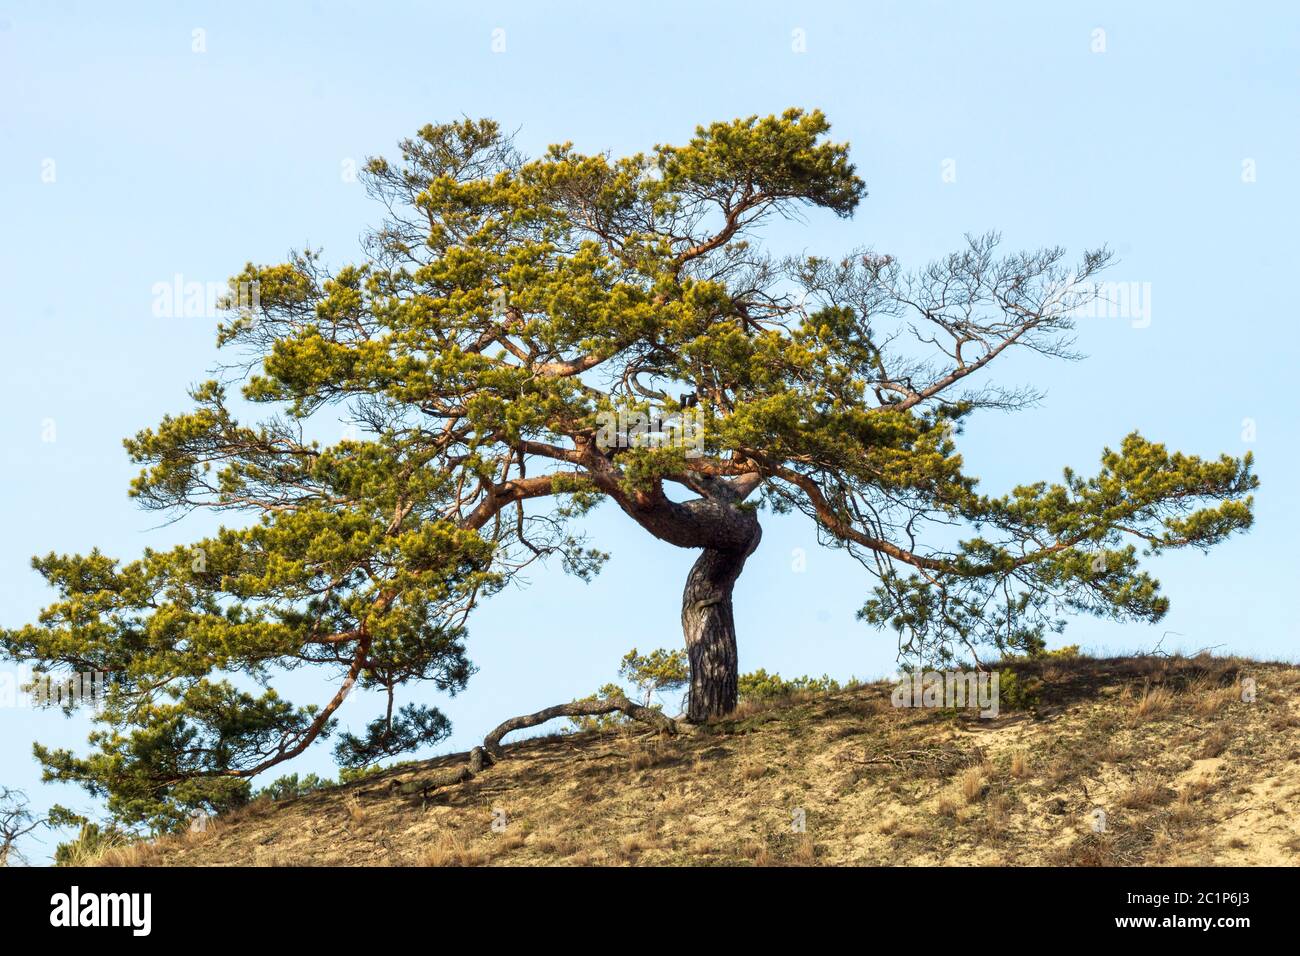 Tree with gnarled branches on hill under blue sky horizontal with flare Stock Photo